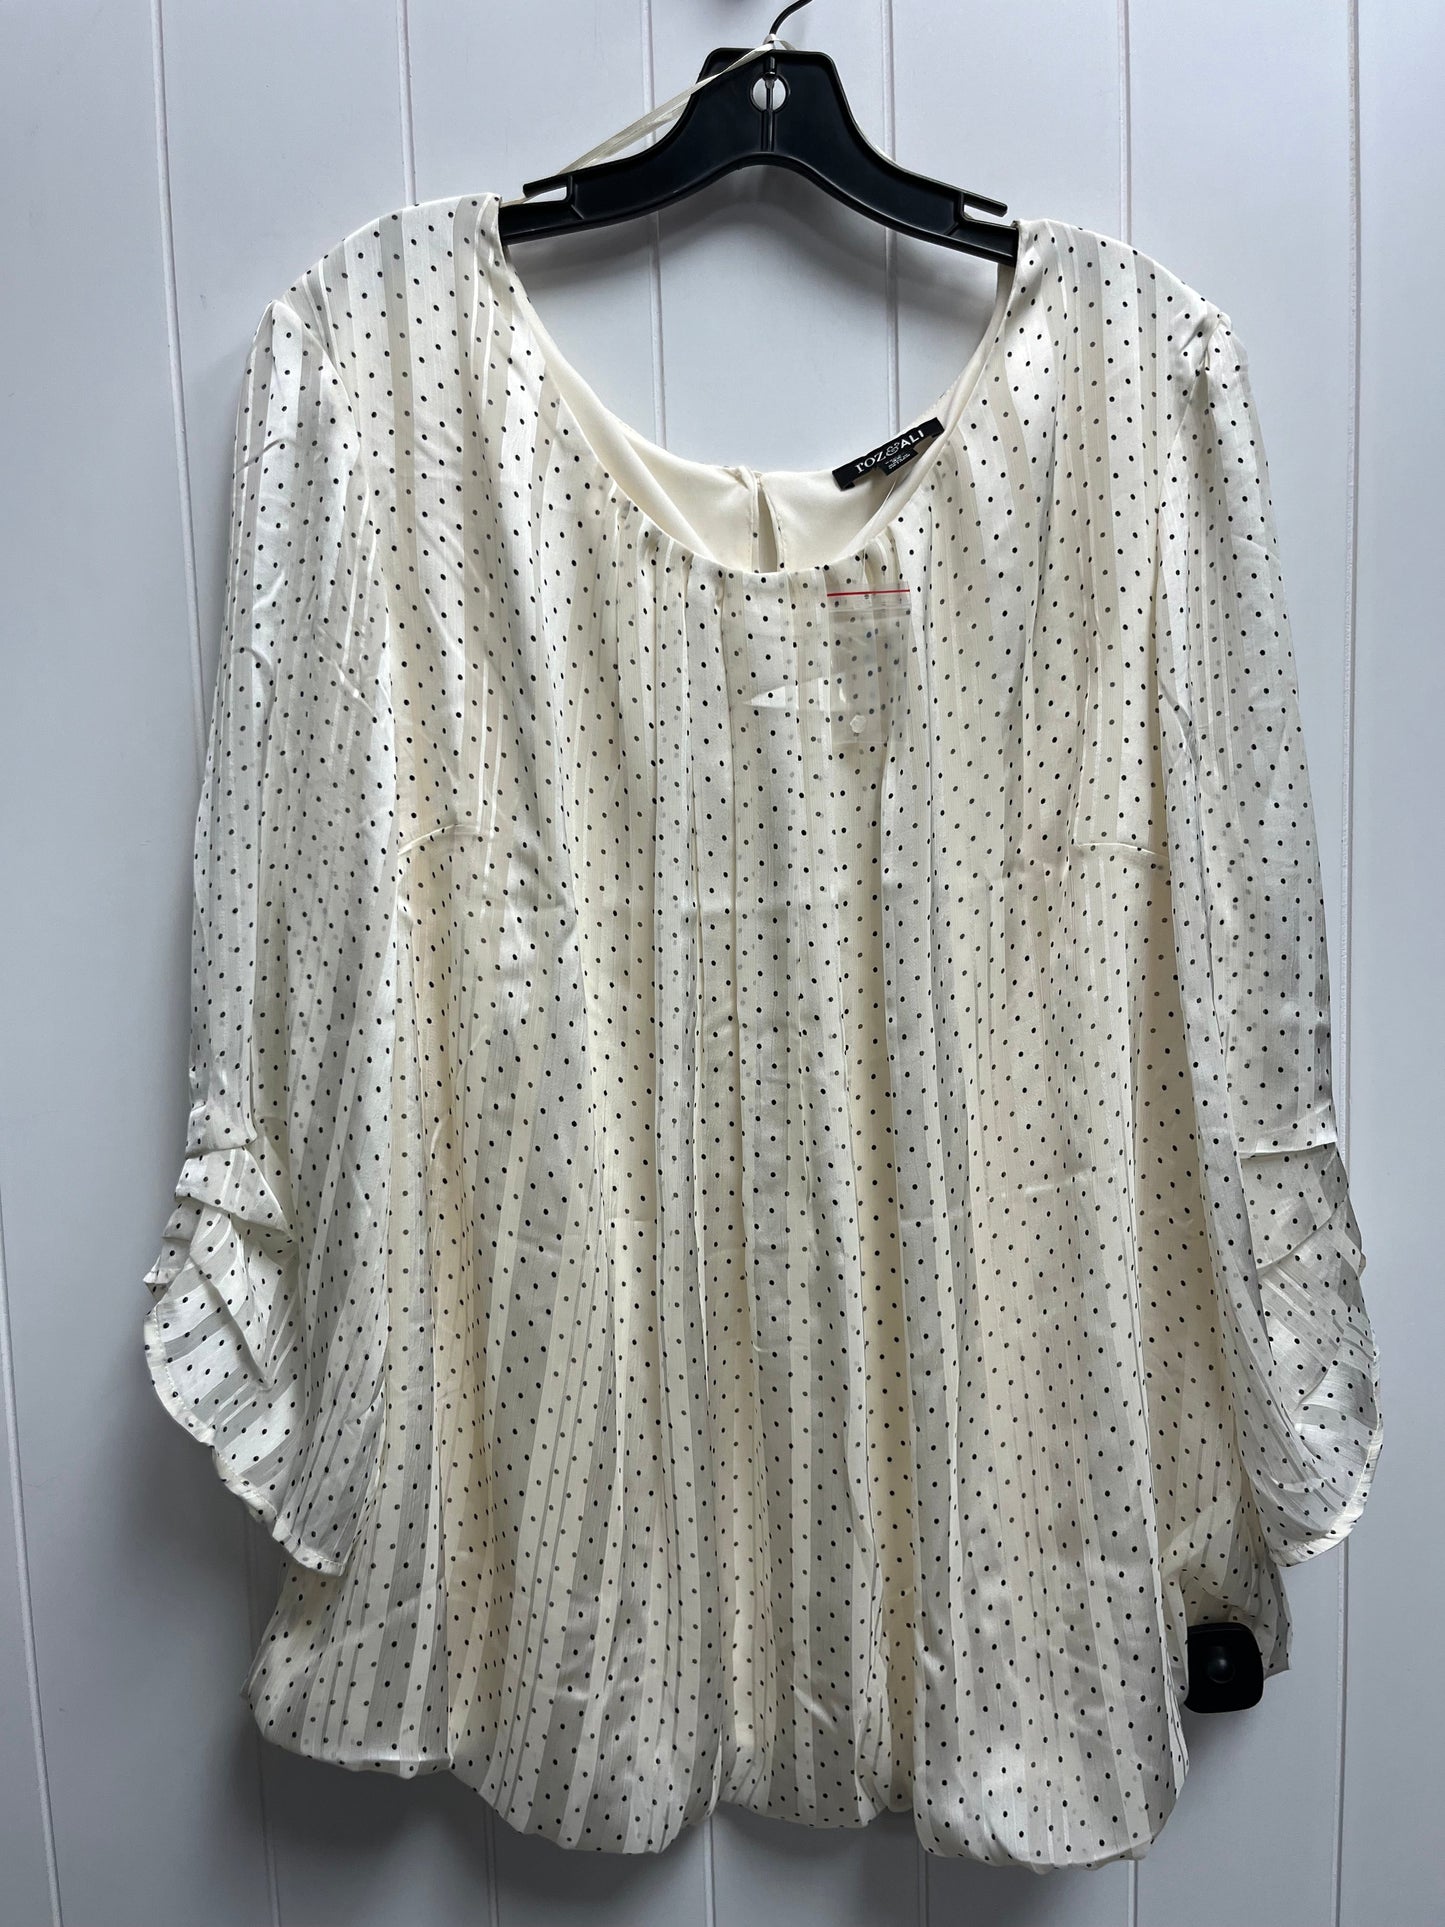 Blouse Long Sleeve By Roz And Ali  Size: 3x